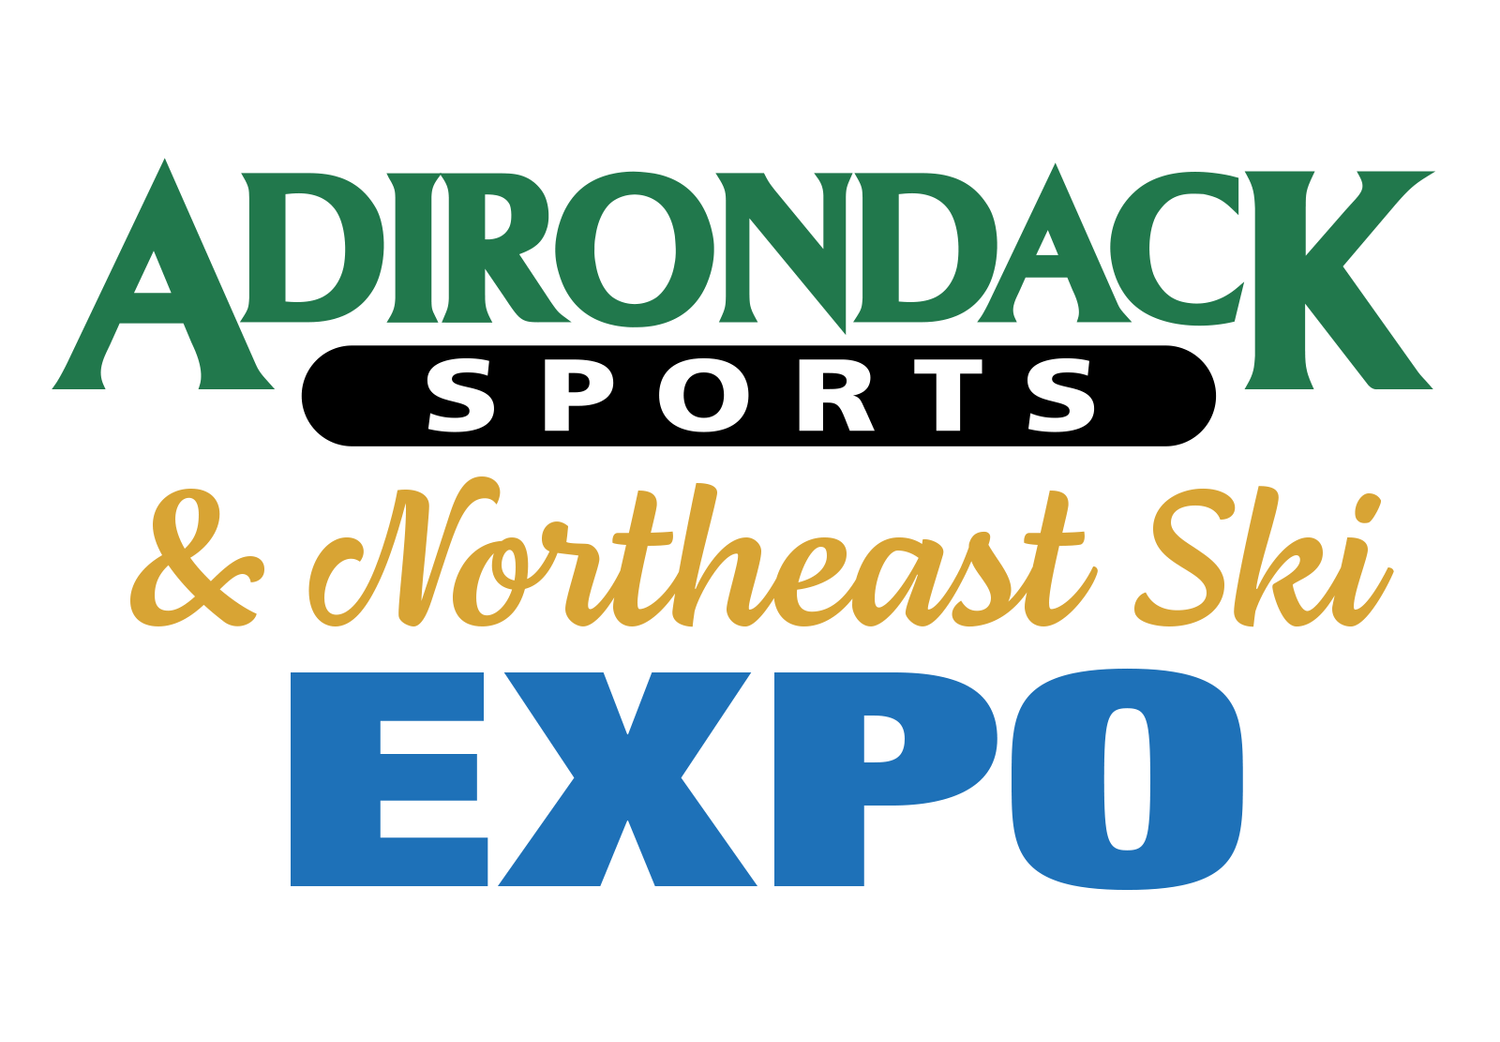 Adirondack Sports & Northeast Ski Expo Celebrating 60th Anniversary with a Huge Variety of Outdoor Sports Exhibitors